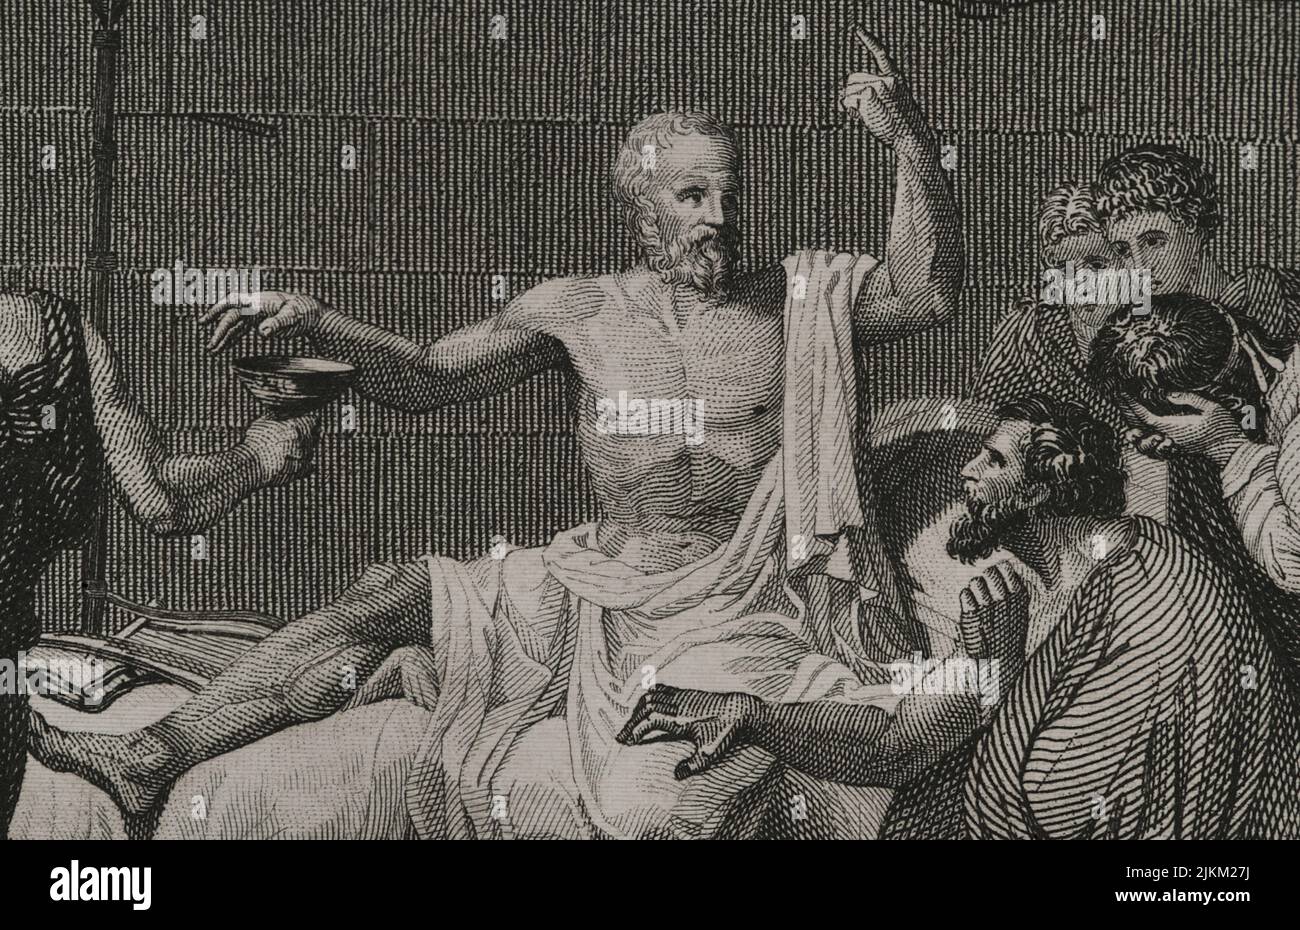 Socrates (ca. 470 BC - 399 BC). Greek philosopher. Accused of corrupting the youth, he was condemned to death by the Heliaia (Supreme Court of Ancient Athens). Death of Socrates. Detail of a engraving by A. Roca, based on the painting by Jacques-Louis David. "Historia Universal", by César Cantú. Volume I, 1854. Stock Photo